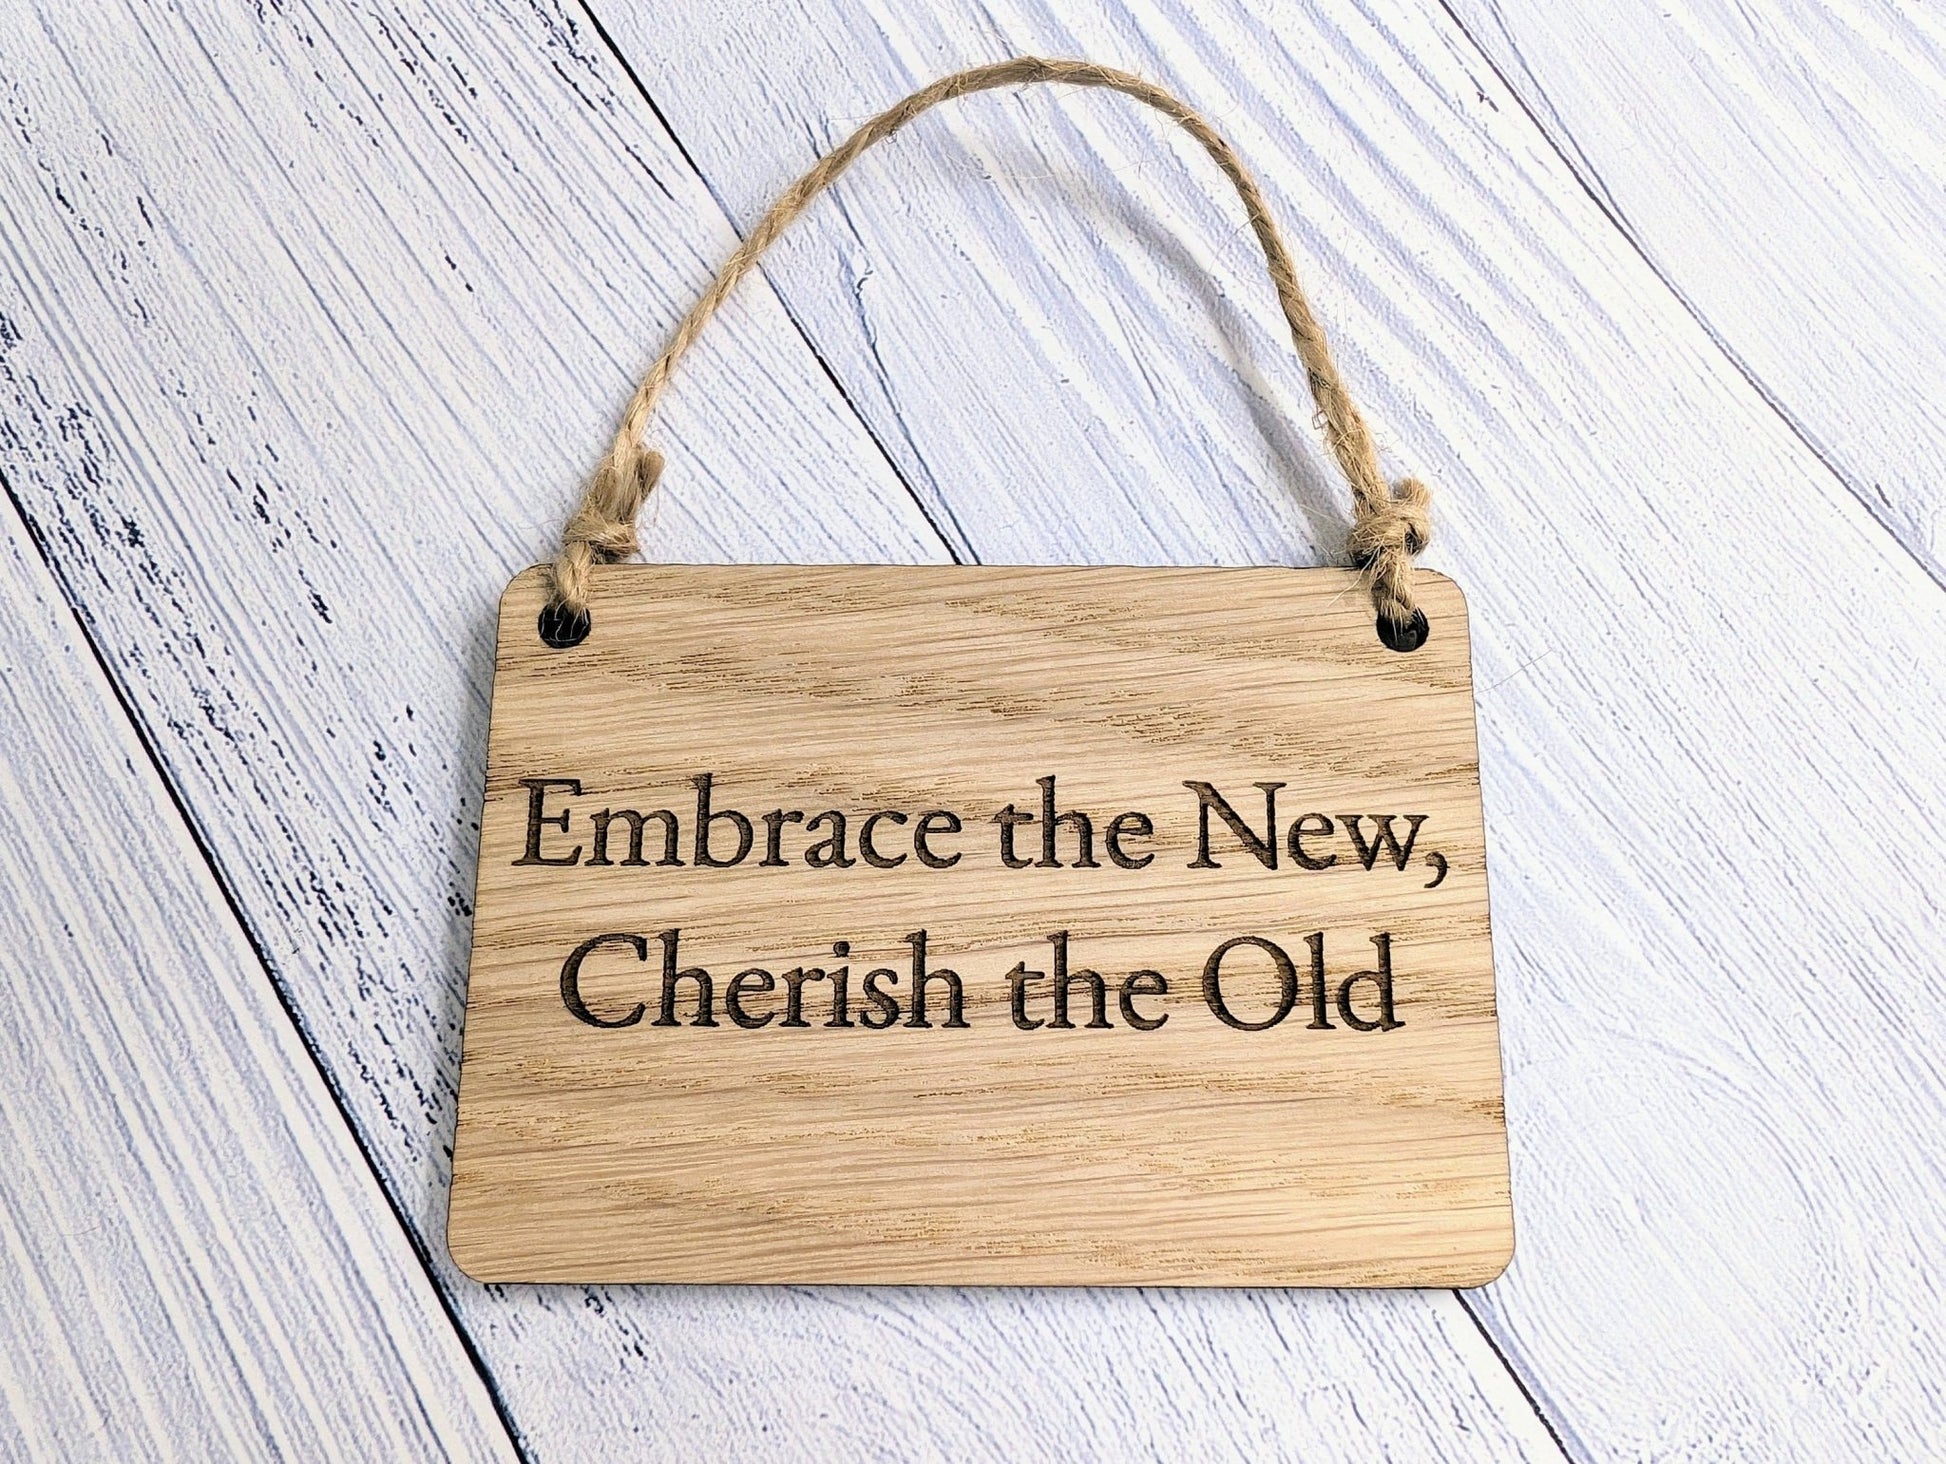 Embrace the Old, Cherish the New Oak Sign - Personalisable, Reflective Decor - CherryGroveCraft